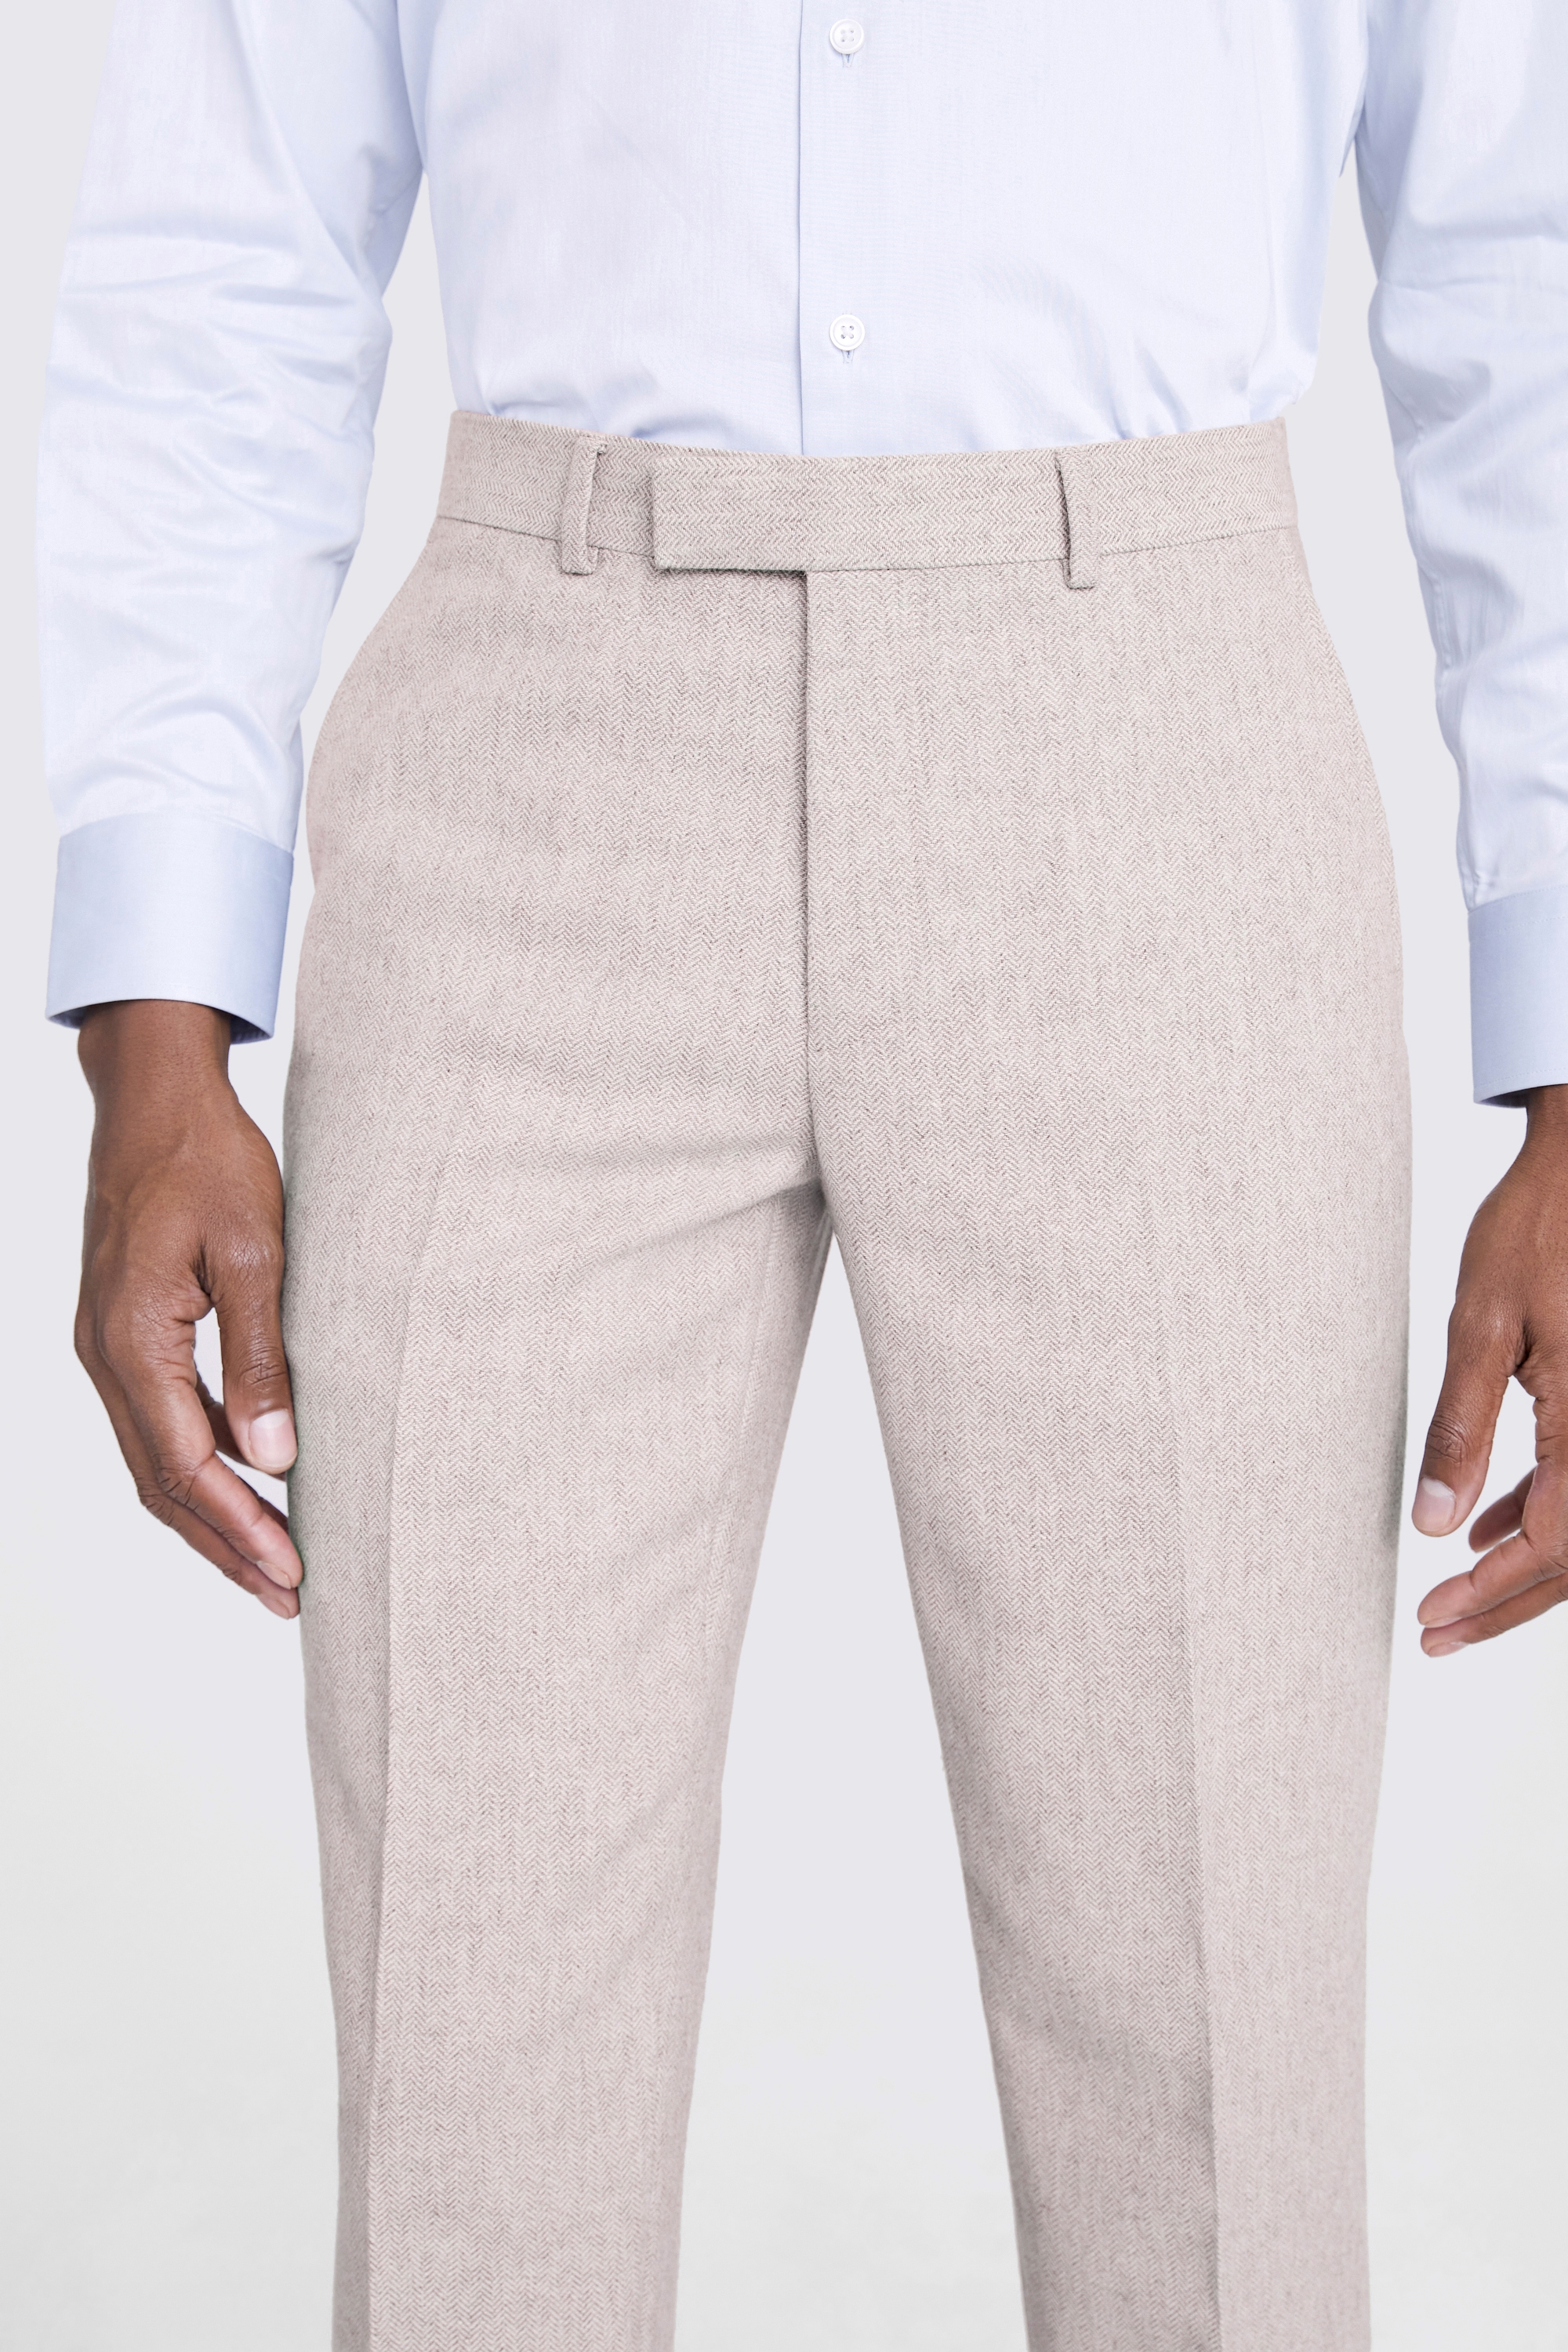 Tailored Fit Light Grey Herringbone Trousers | Buy Online at Moss